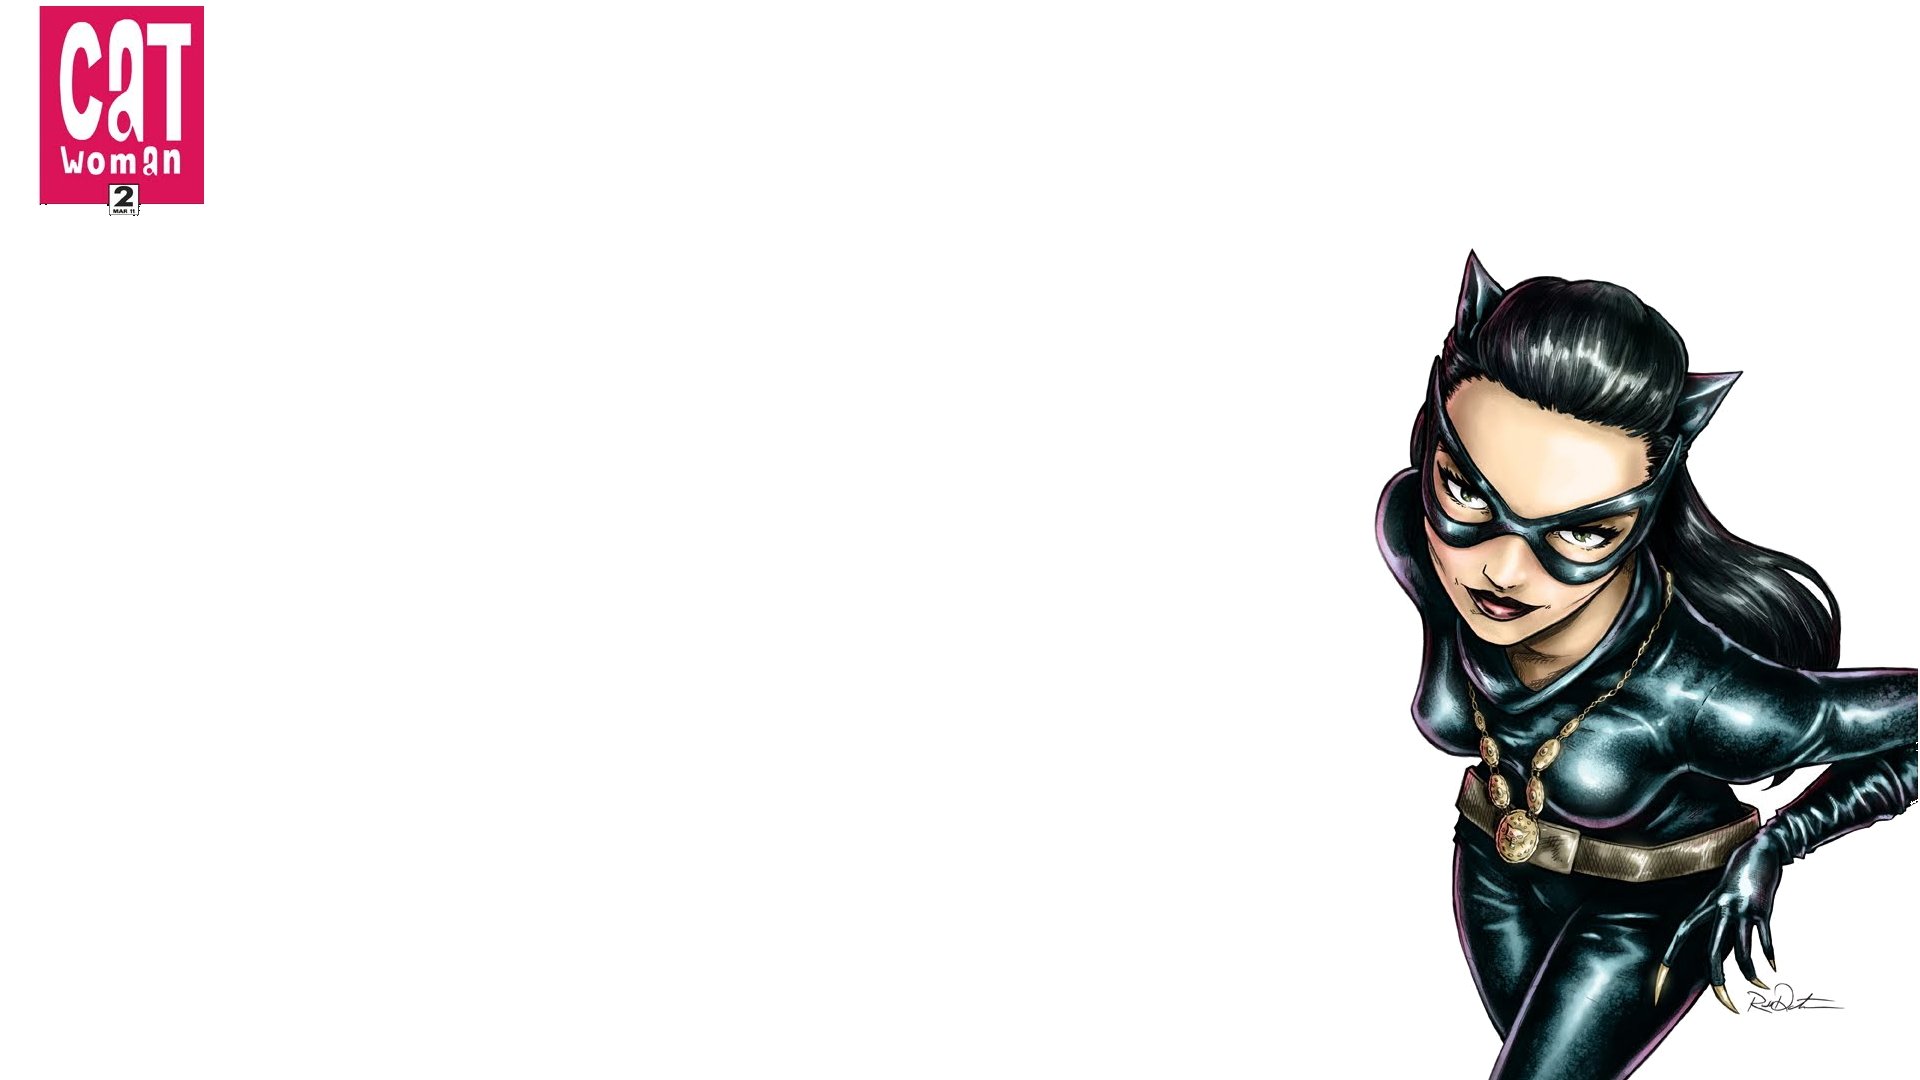 Download full hd 1080p Catwoman PC background ID:81432 for free